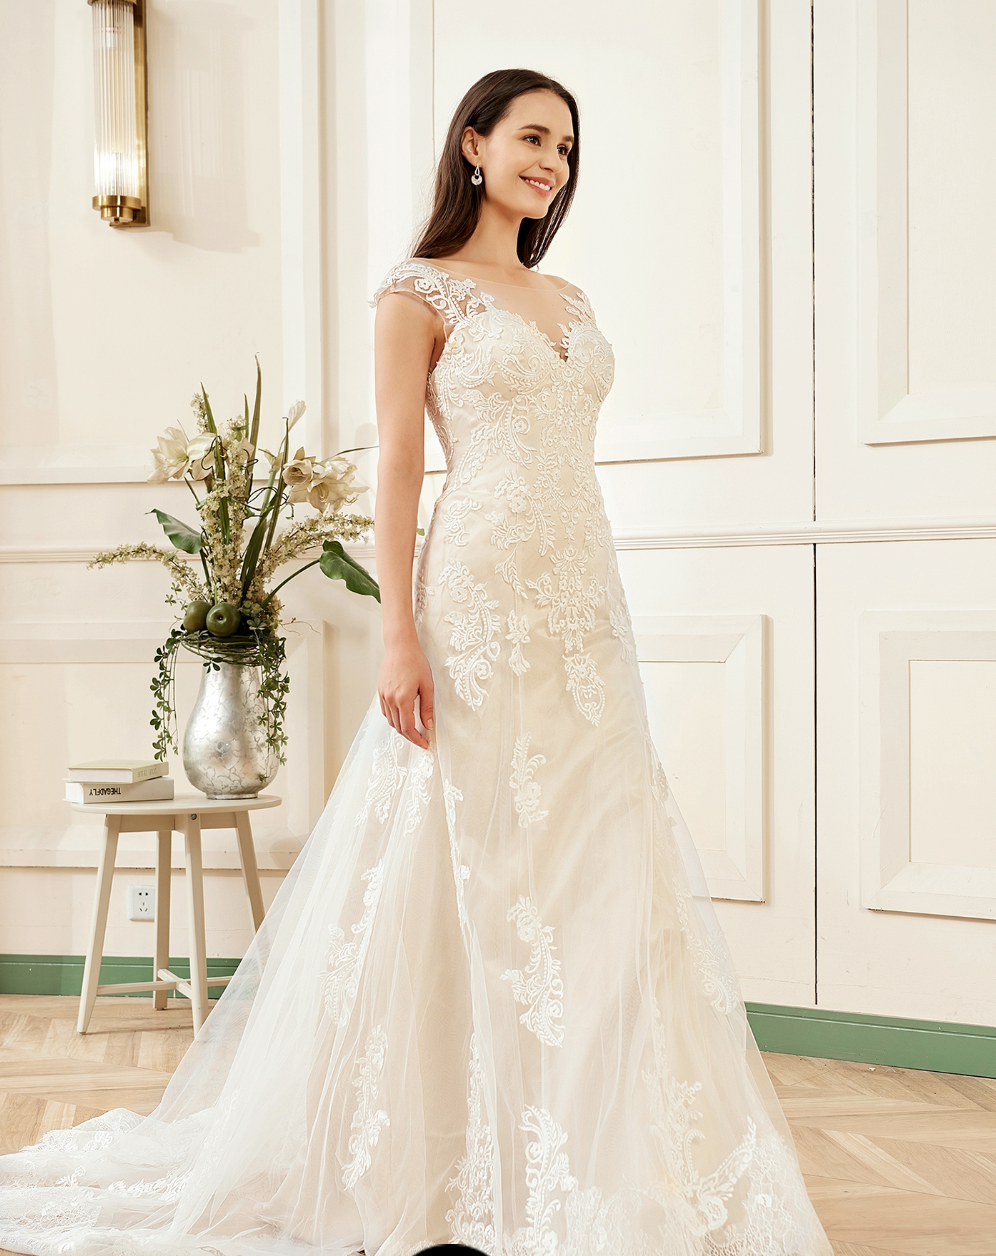 Stunning Illusion Lace Bateau Neckline With Cap Sleeve Wedding Gown